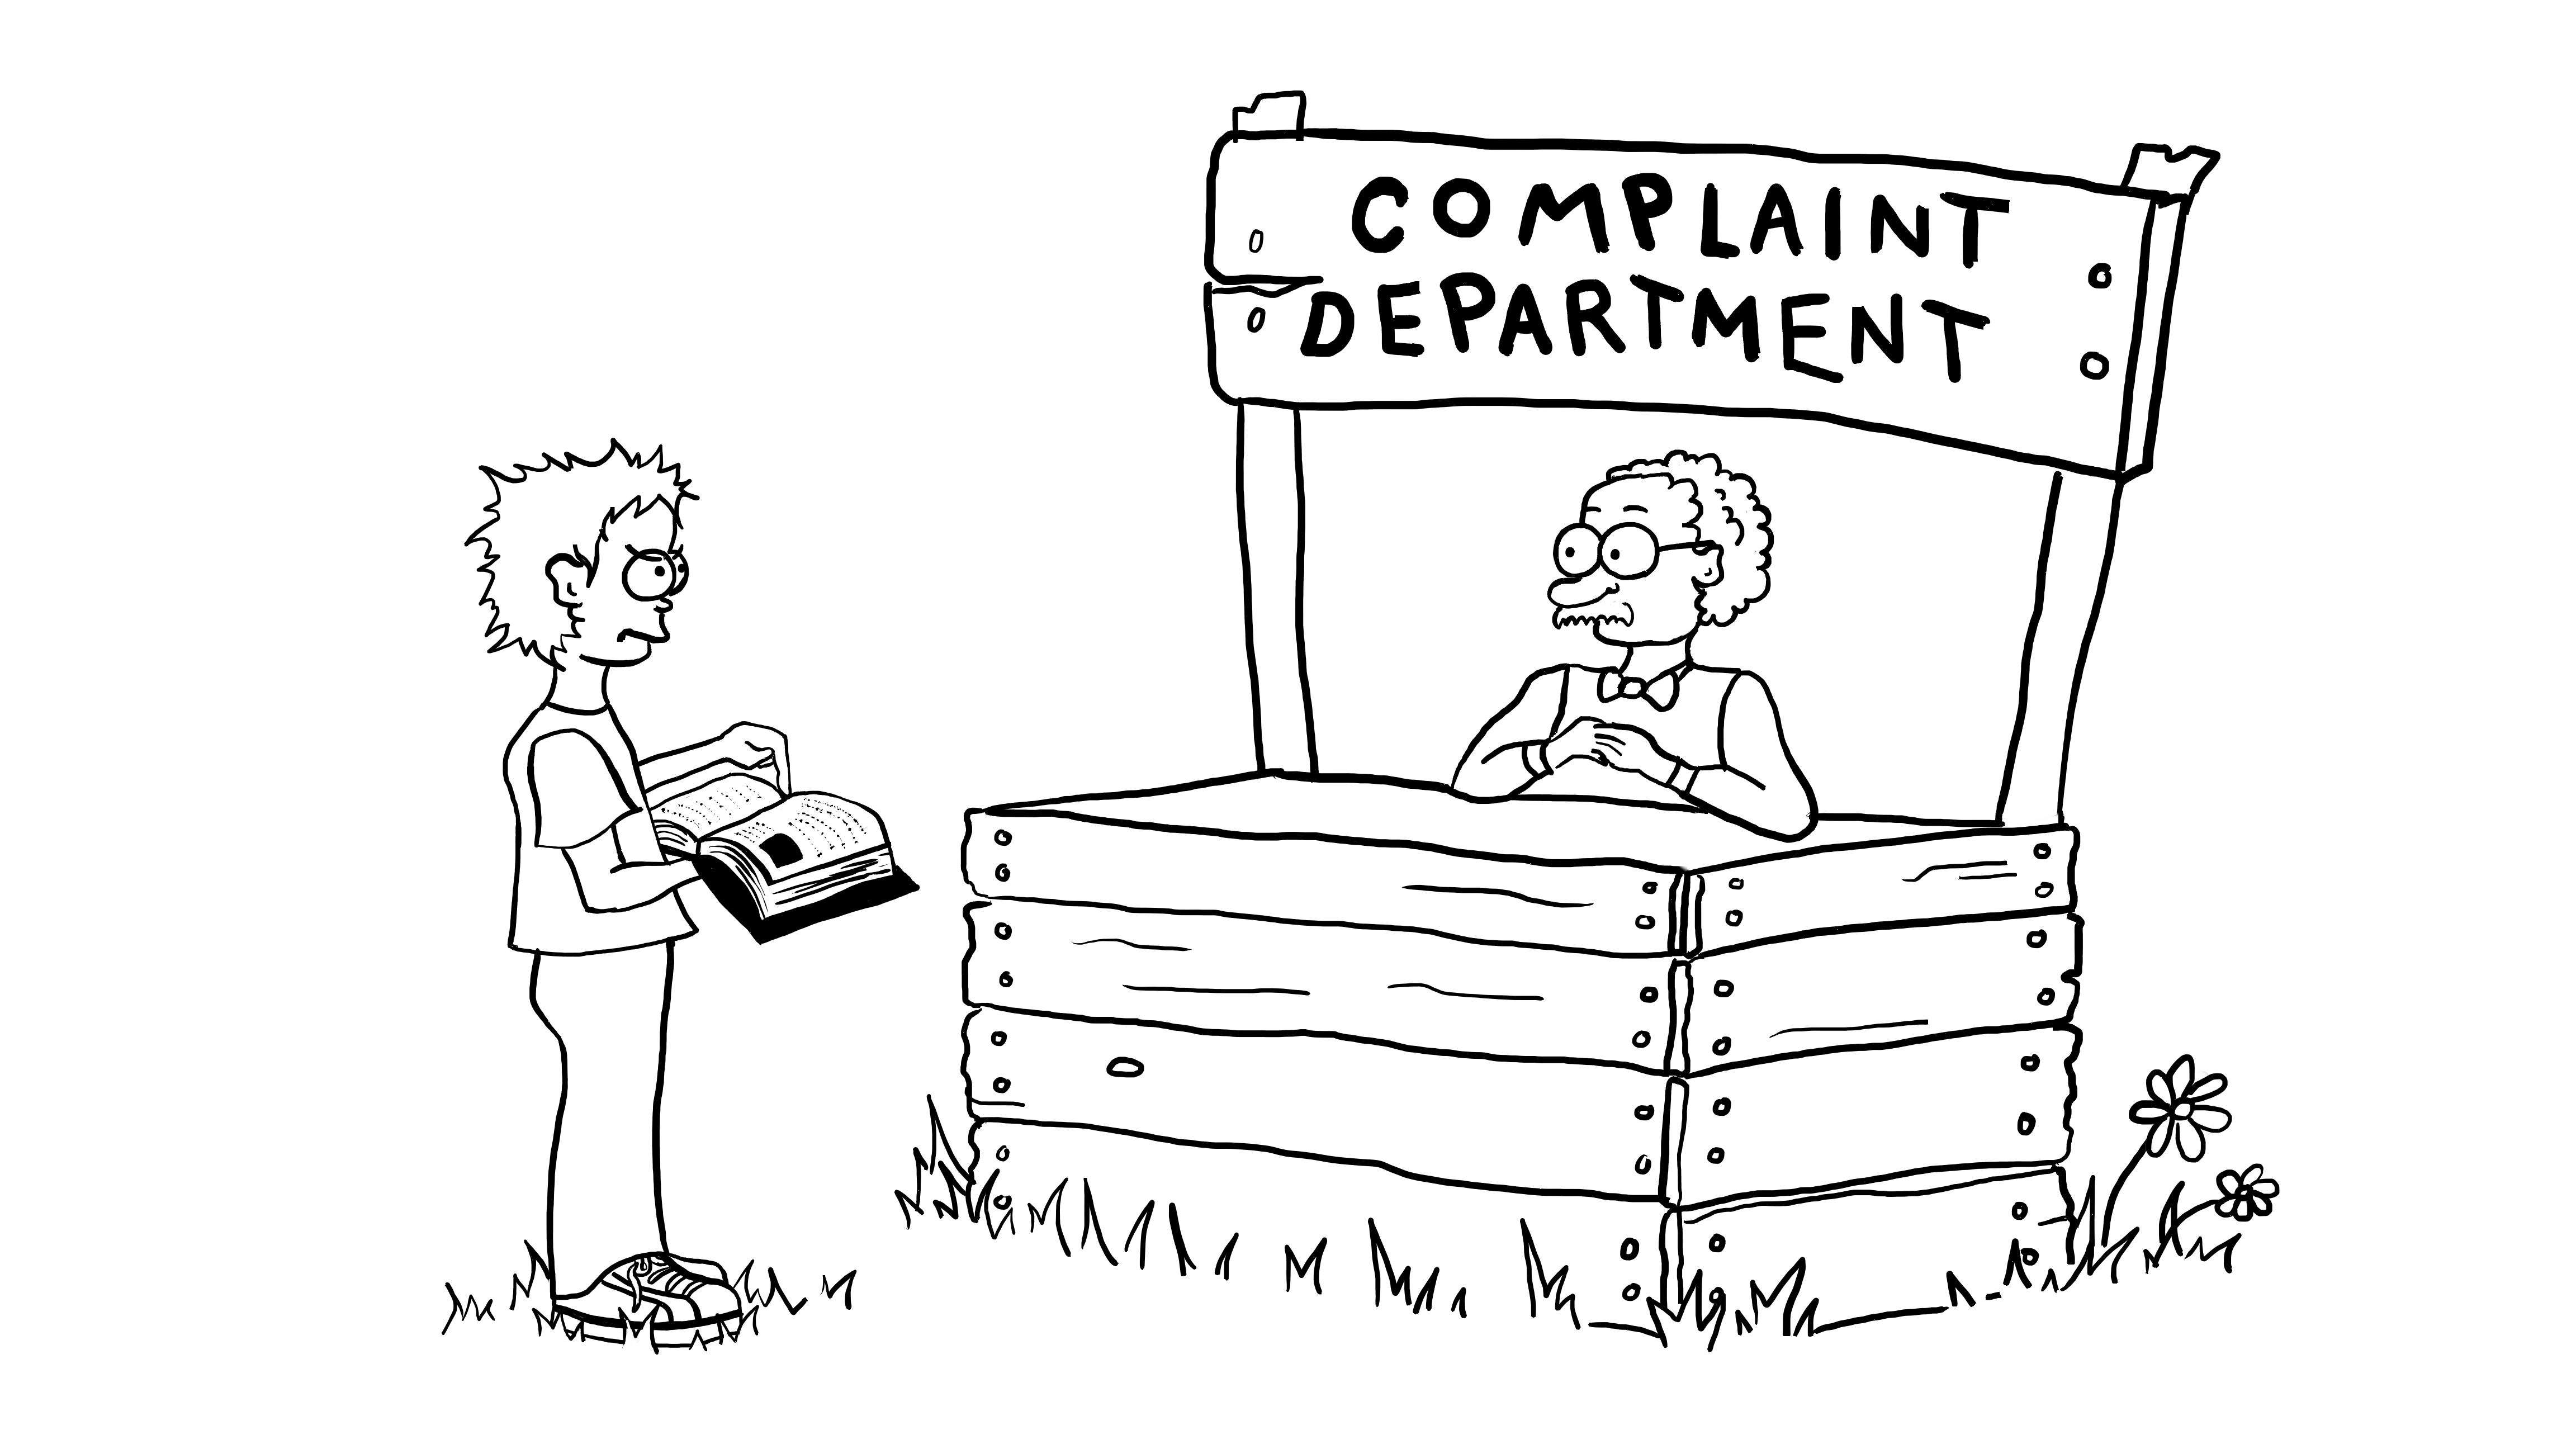 Errors and Complaints